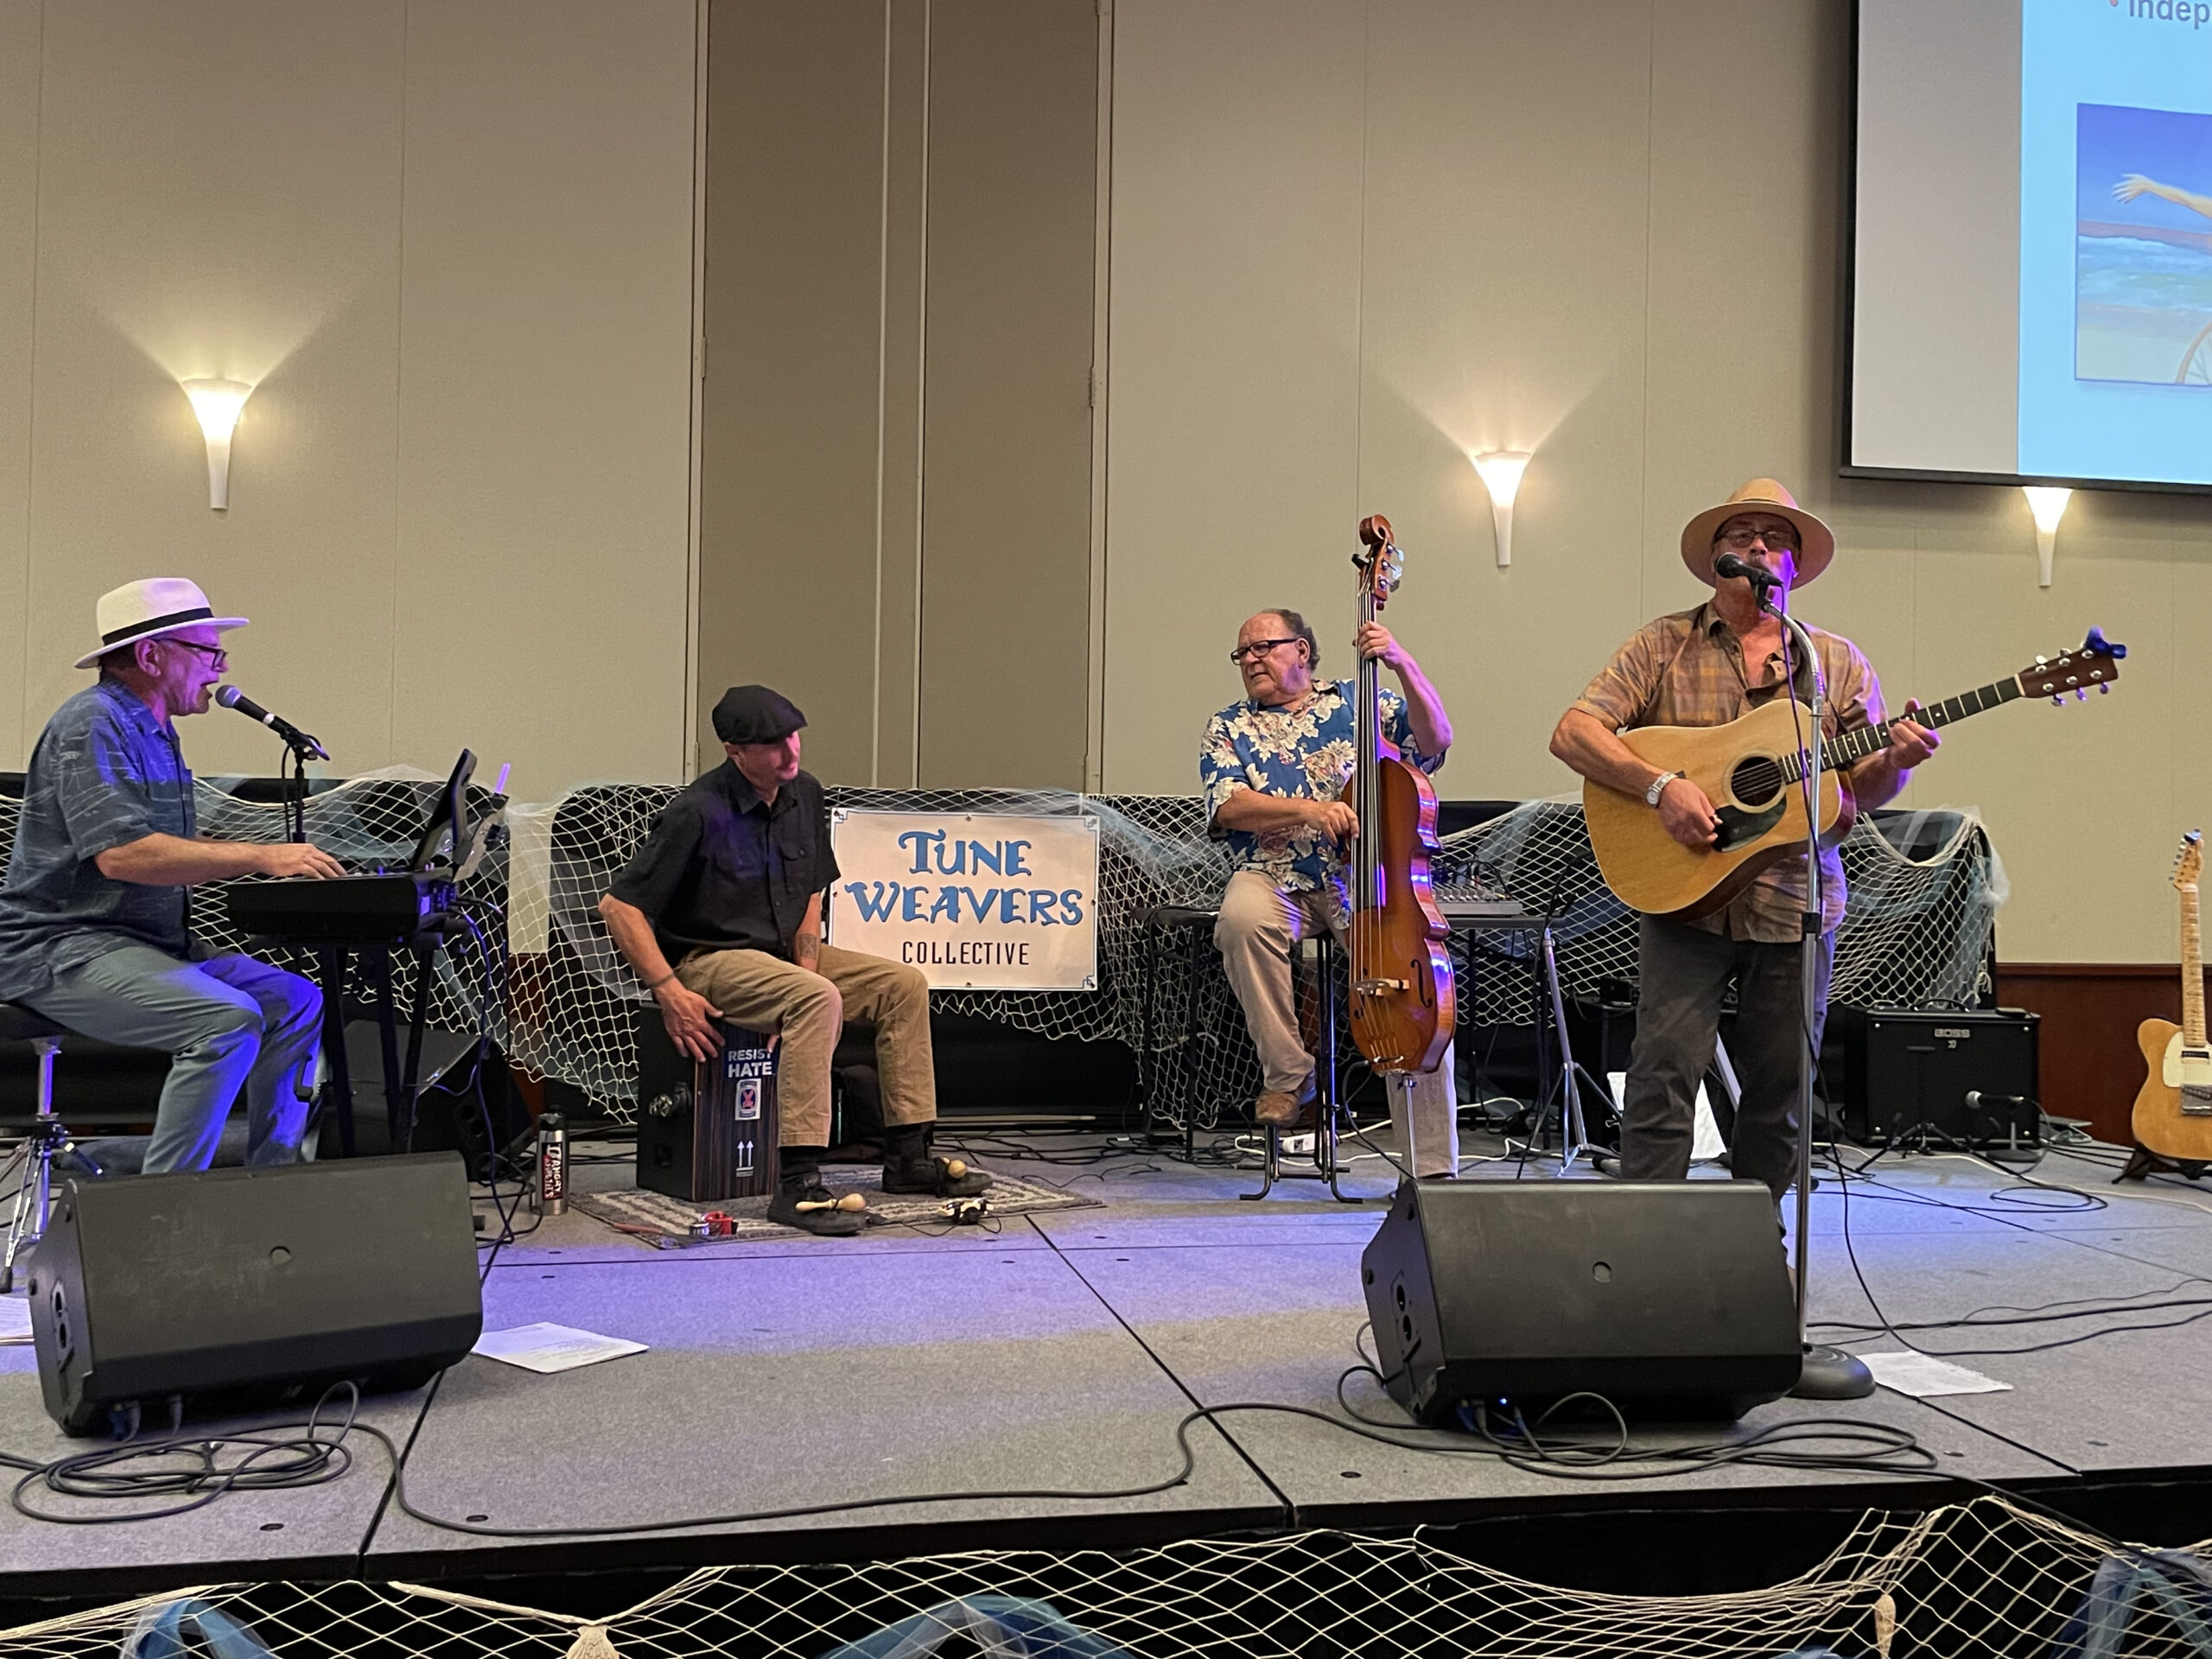 Four musicians perform on stage at CMU ballroom.